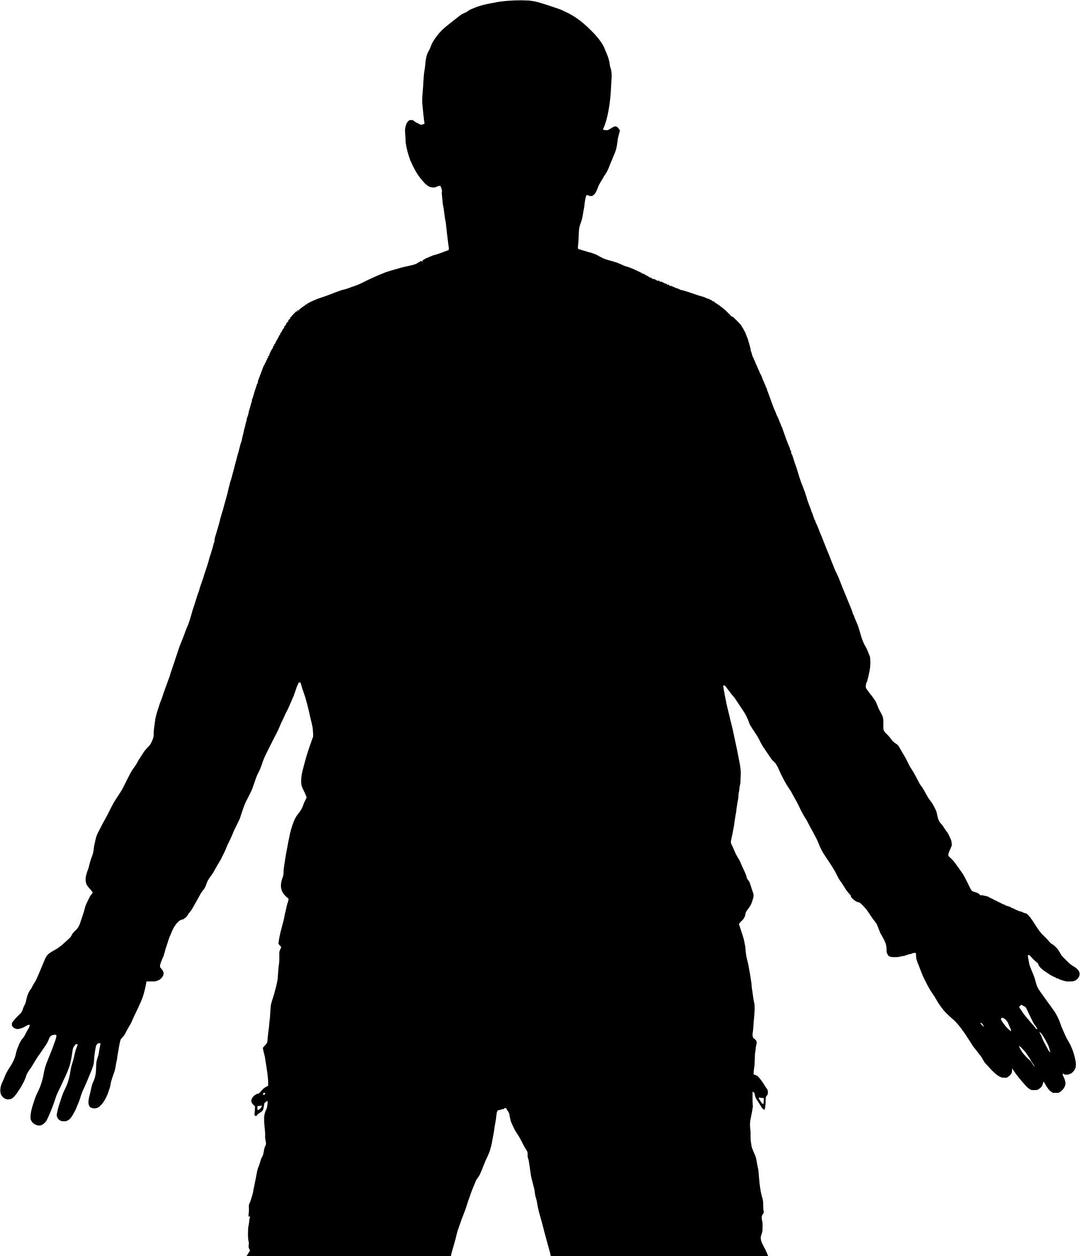 Man With Arms Out Silhouette png transparent